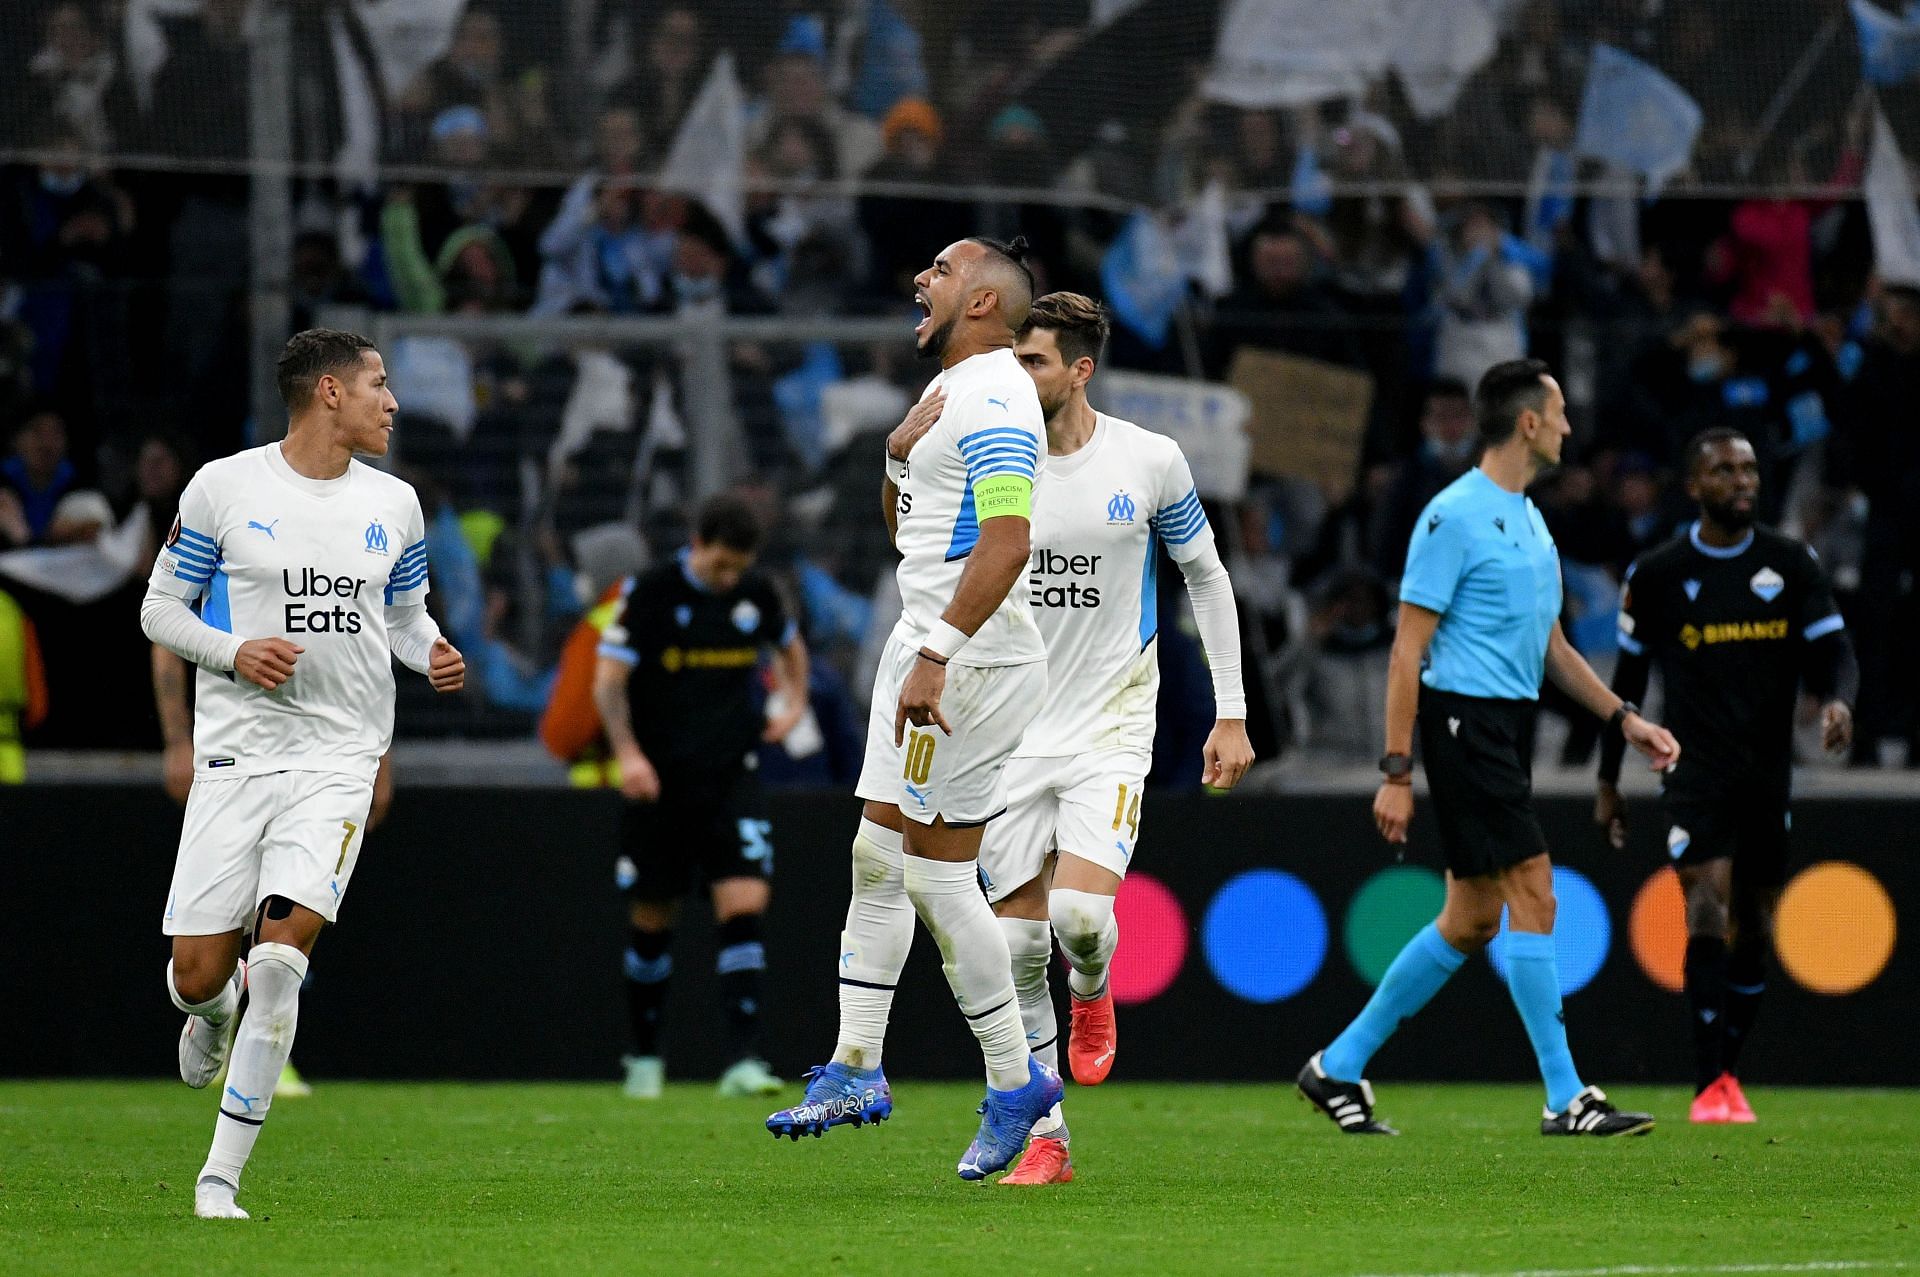 Olympique Marseille face Chauvigny in their Coupe de France fixture on Sunday